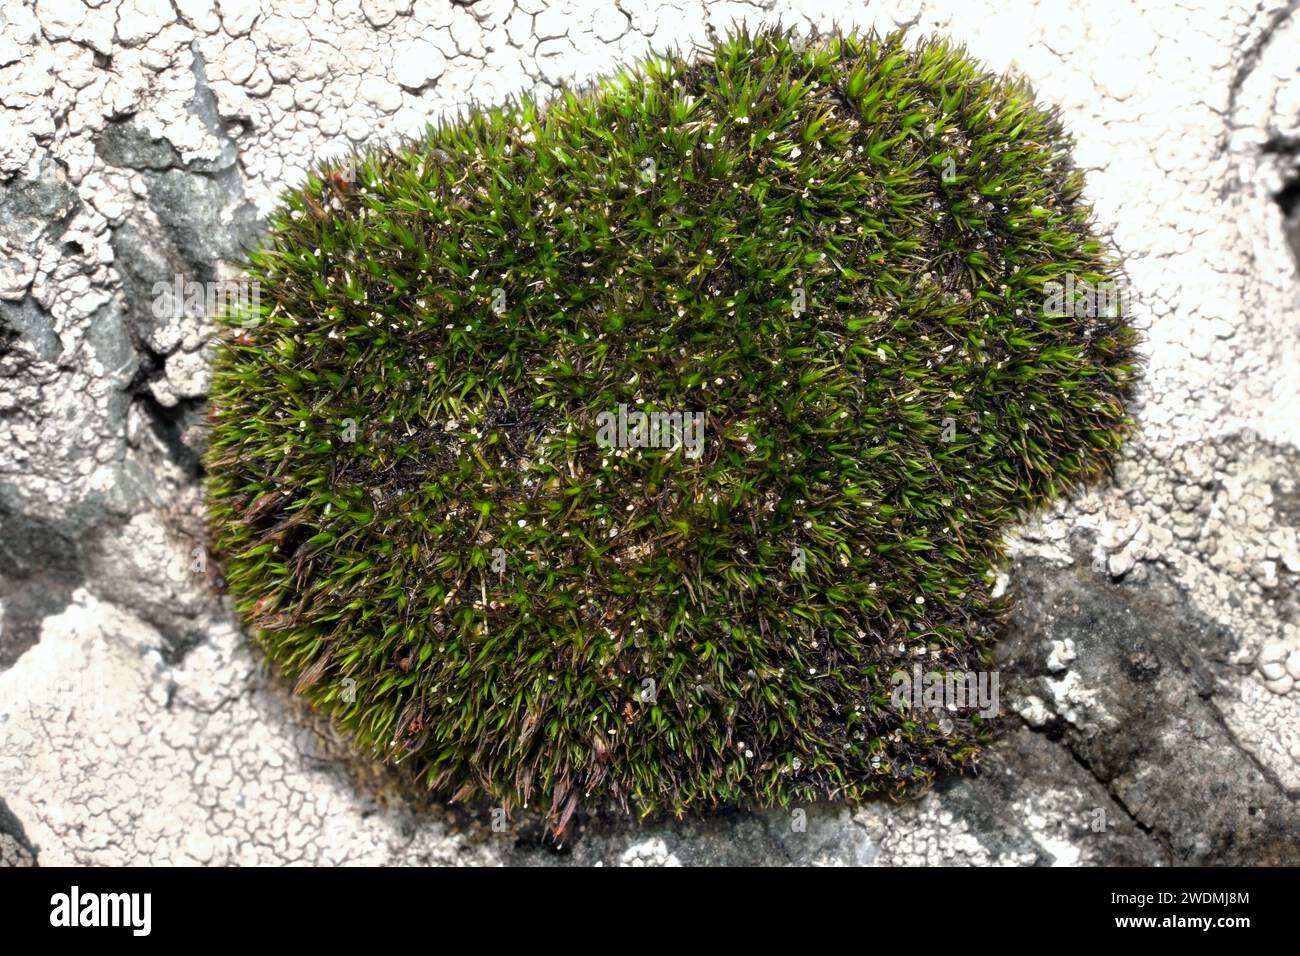 The moss Schistidium maritimum (Seaside Grimmia) grows in shallow crevices in coastal rocks. It's mostly confined to the Northern Hemisphere. Stock Photo